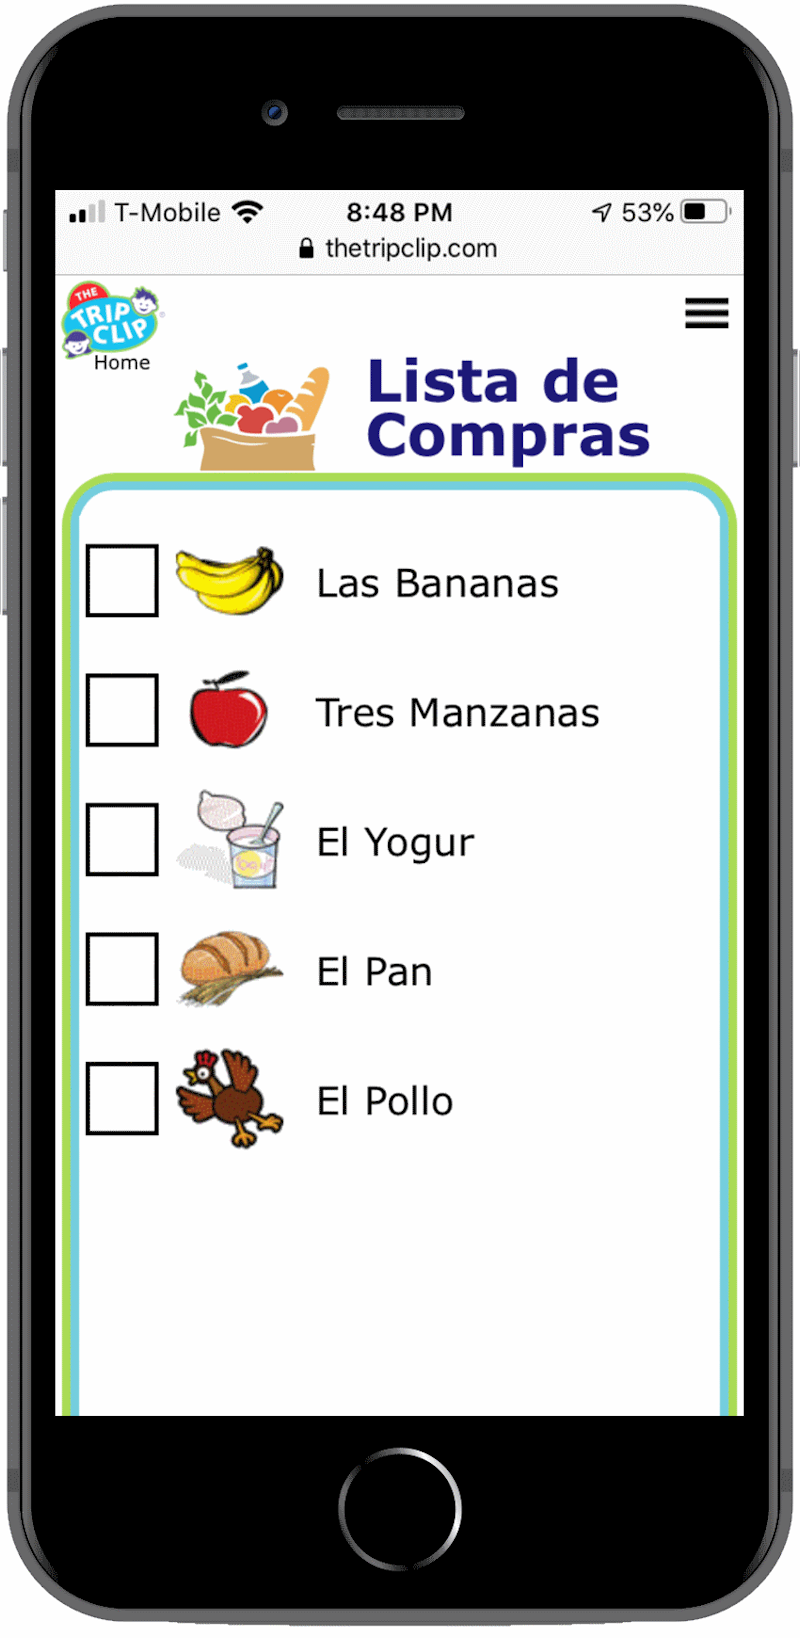 Lista de Compras picture checklist in spanish for grocery shopping